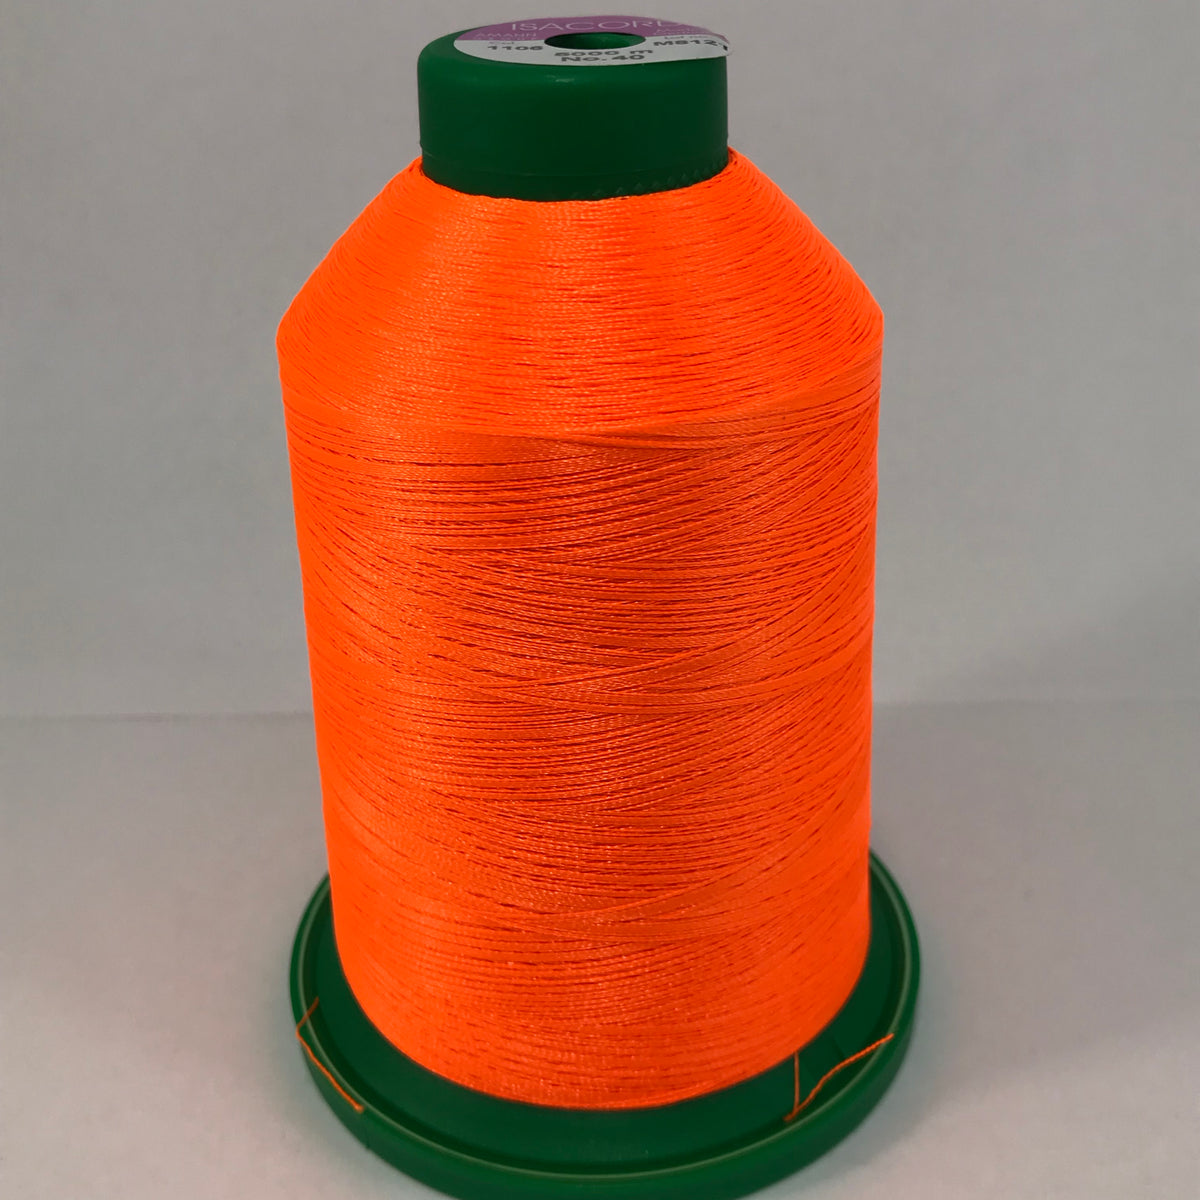 Isacord 1800 Wildfire Embroidery Thread